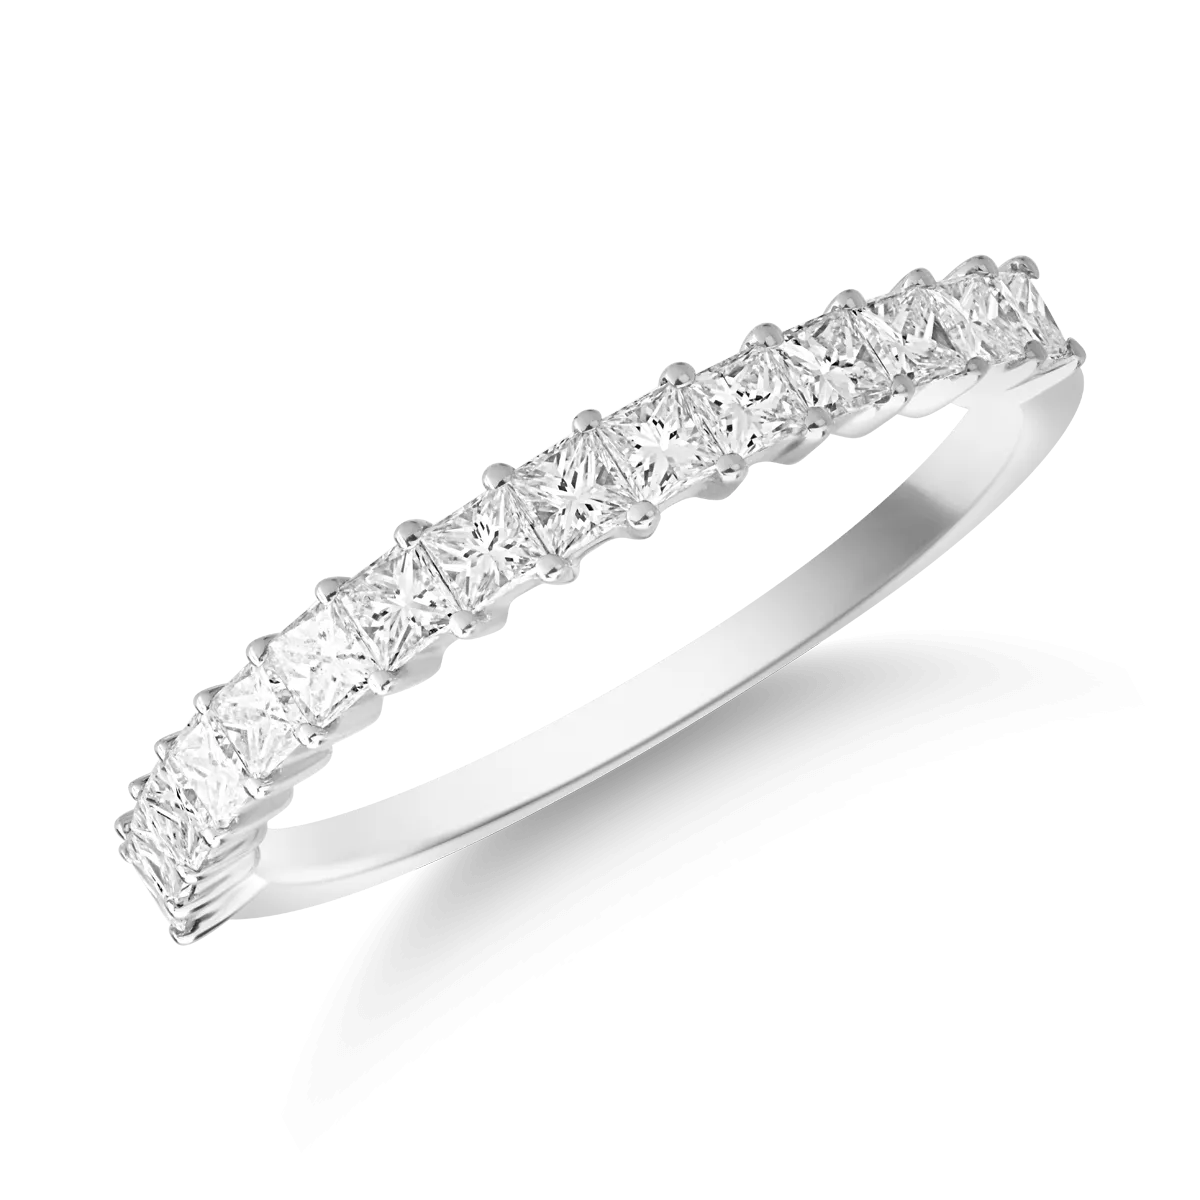 18K white gold ring with 0.62ct diamonds